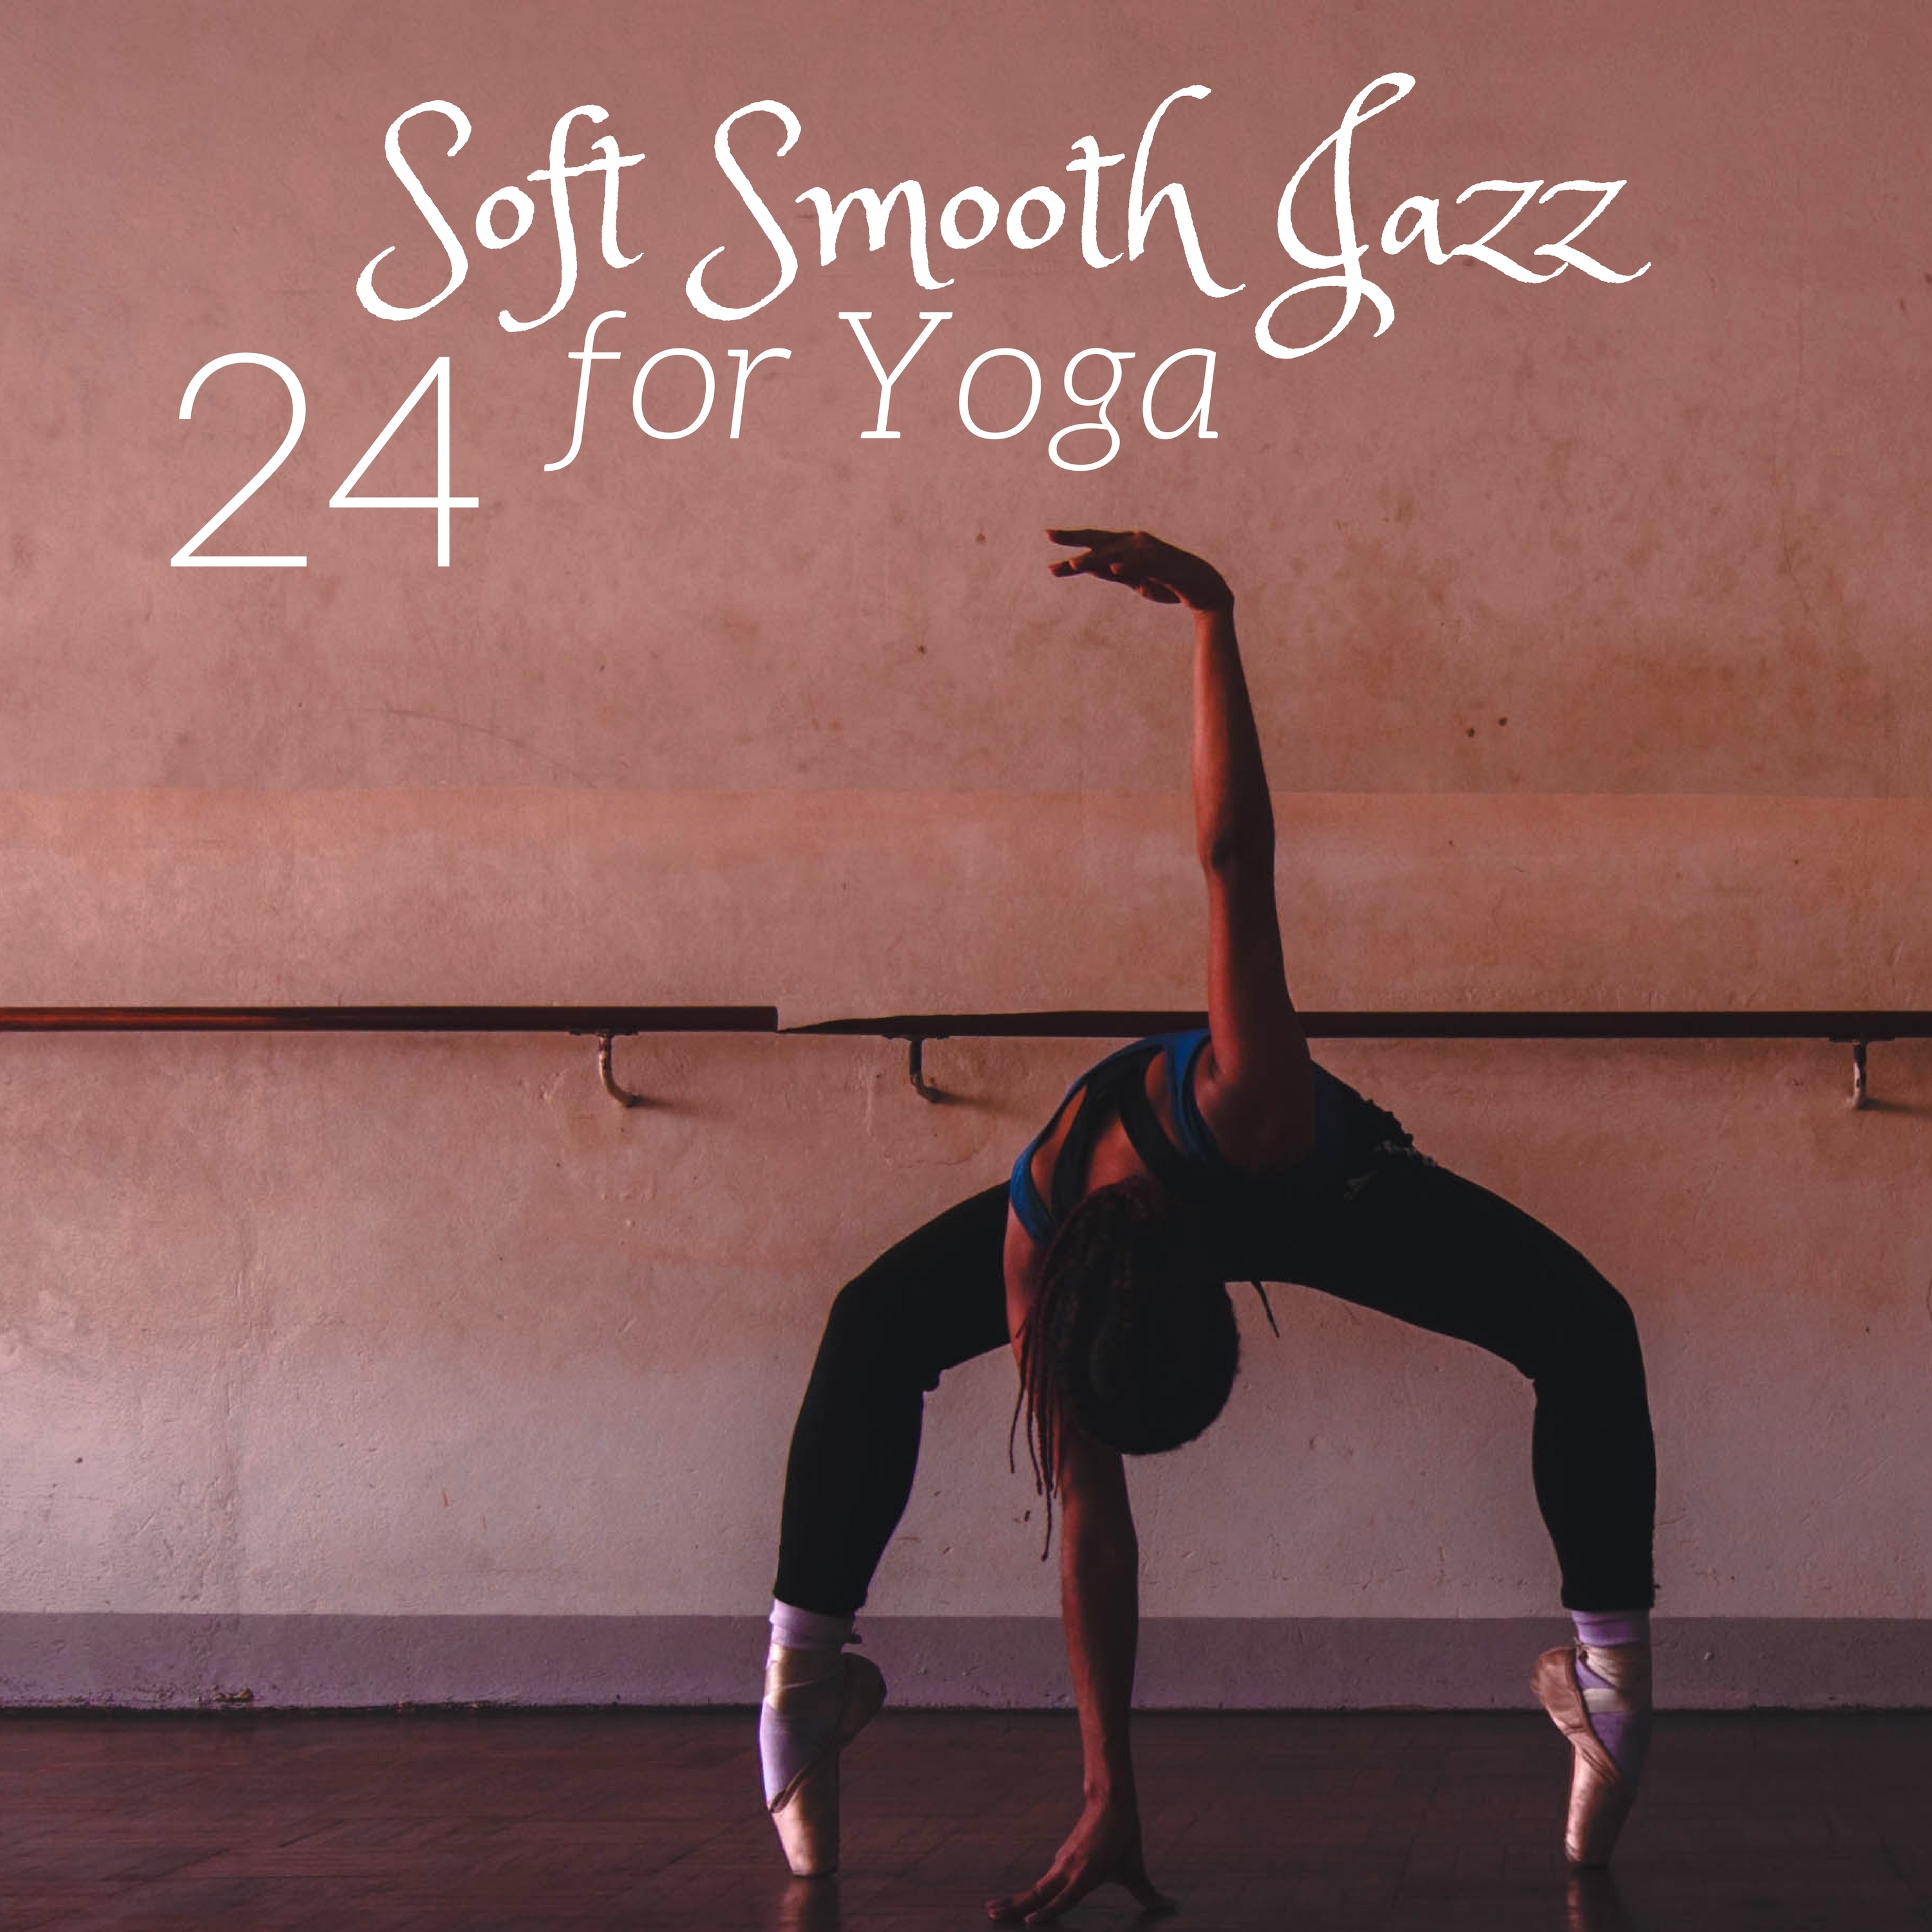 24 Soft Smooth Jazz for Yoga - Relaxing Prime Mp3 Collection